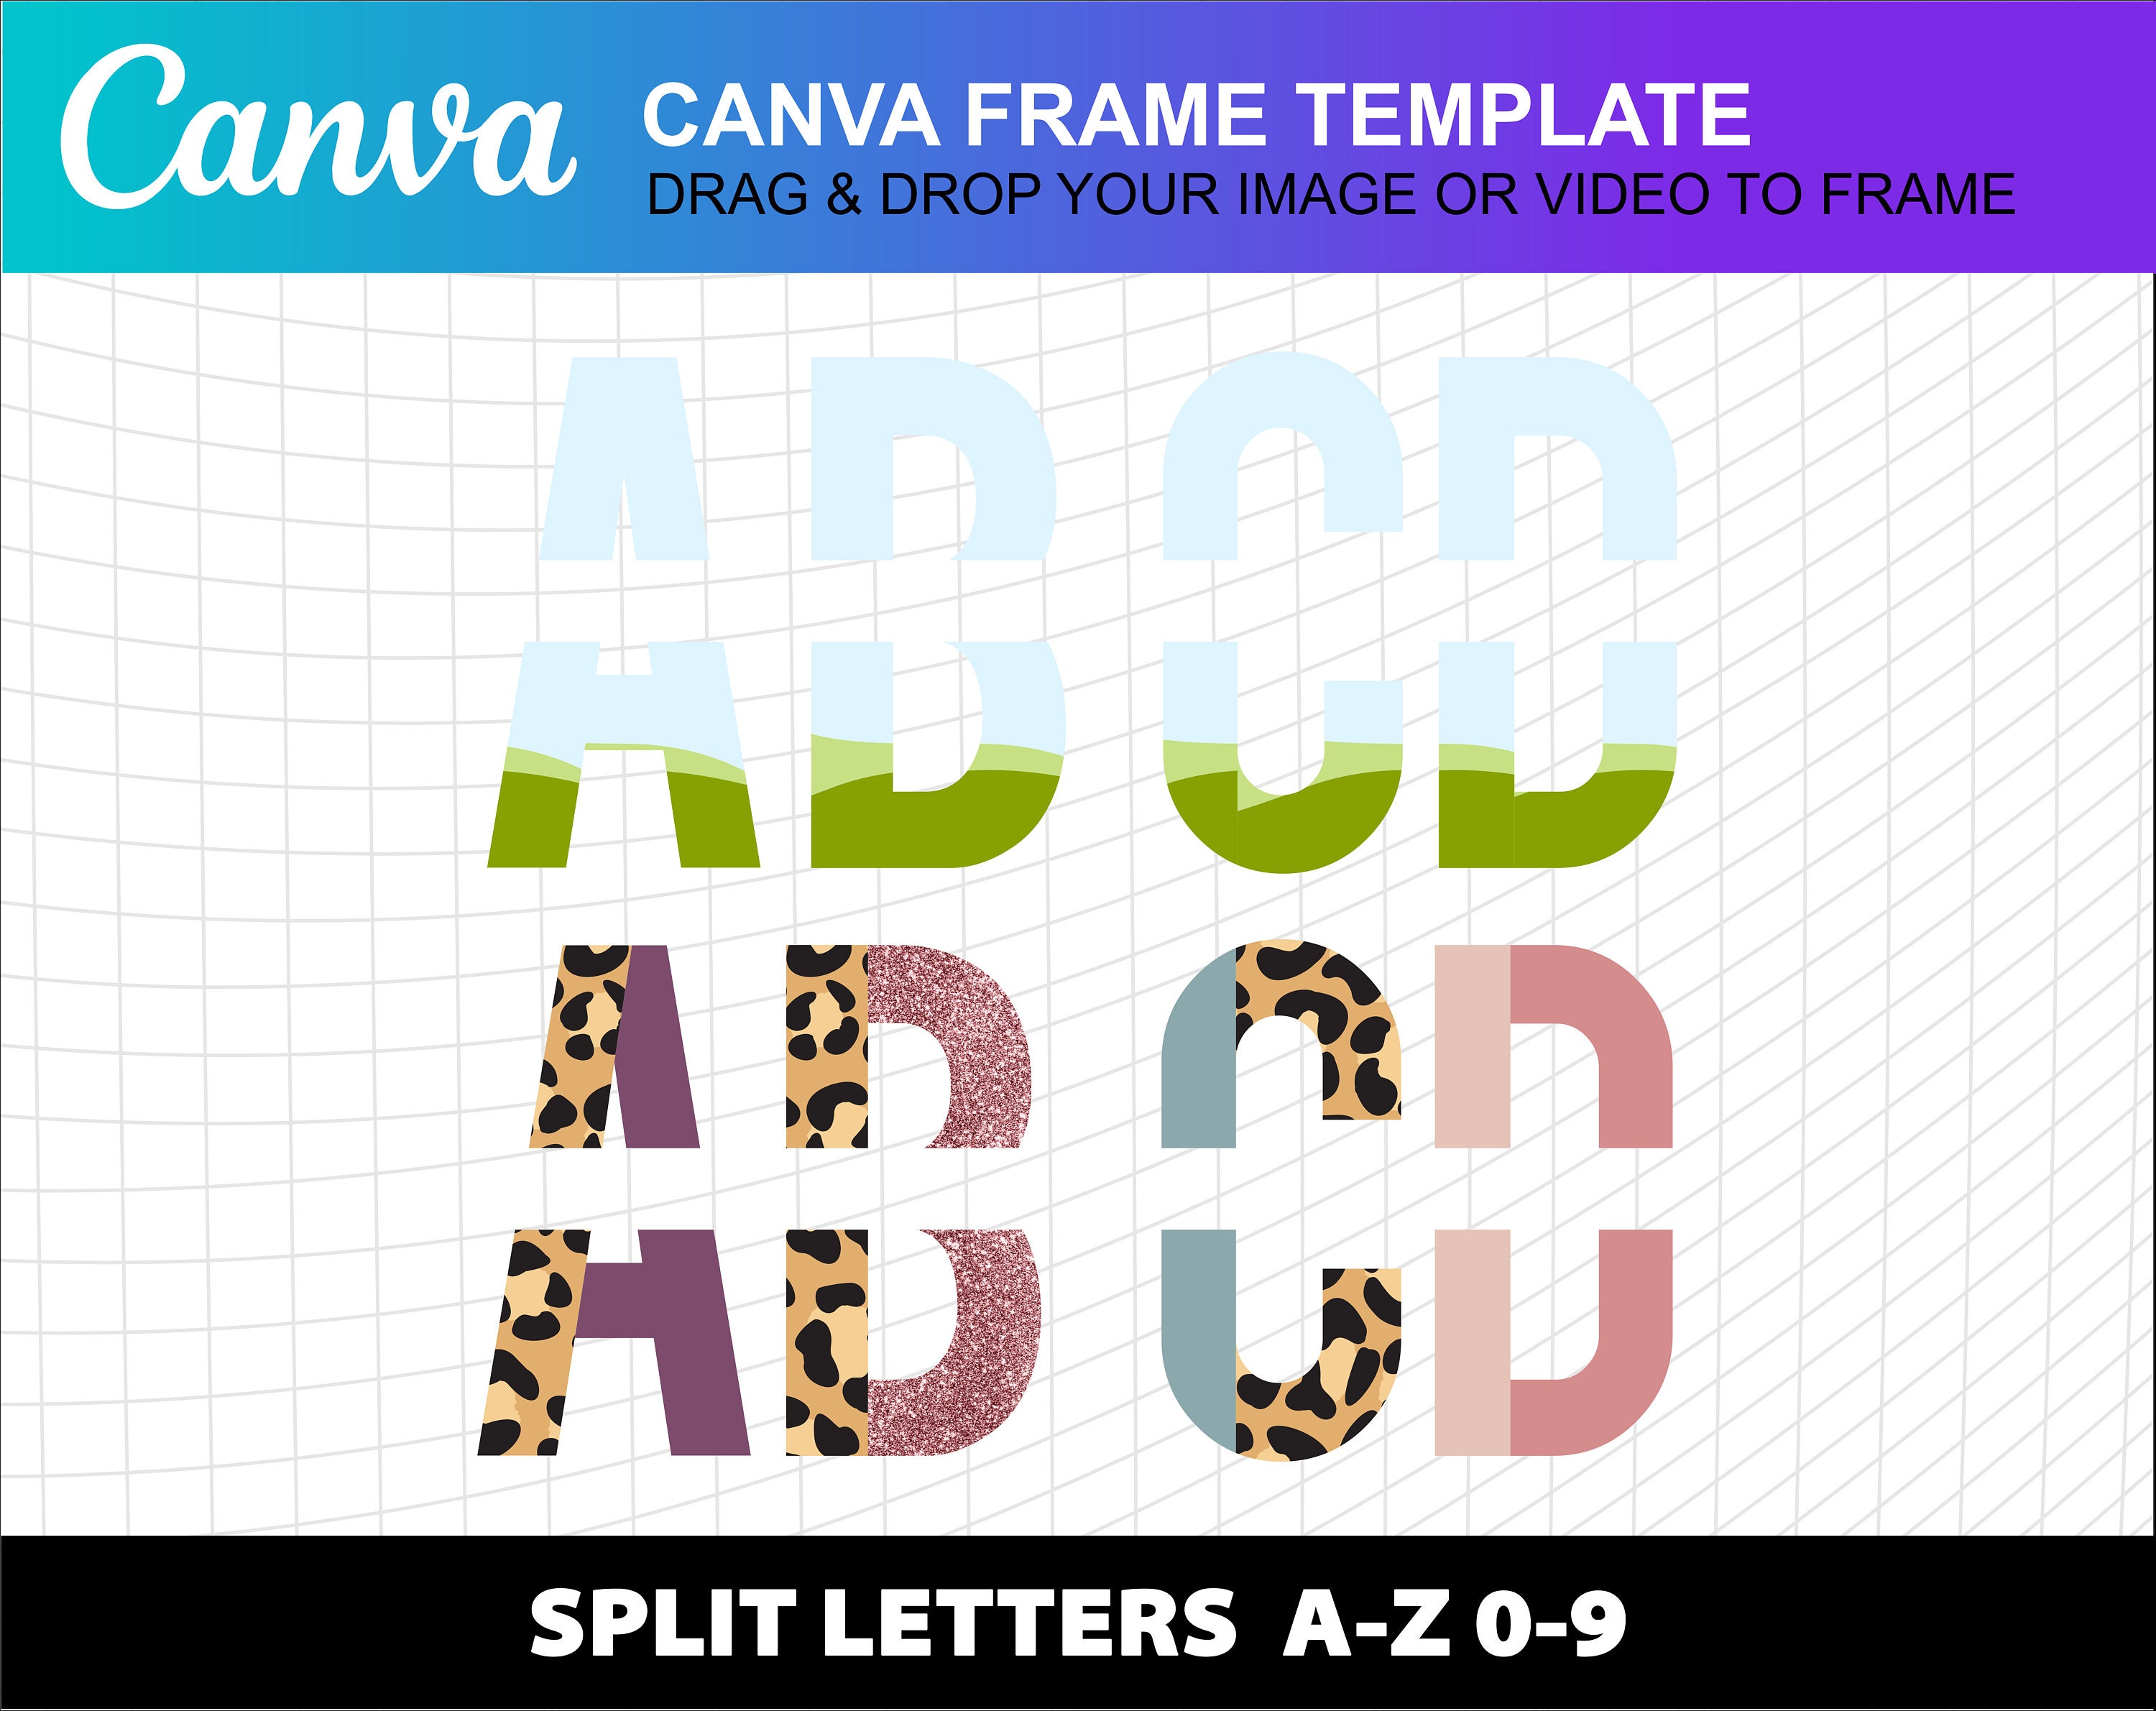 How to Split an Image in Canva - Canva Templates